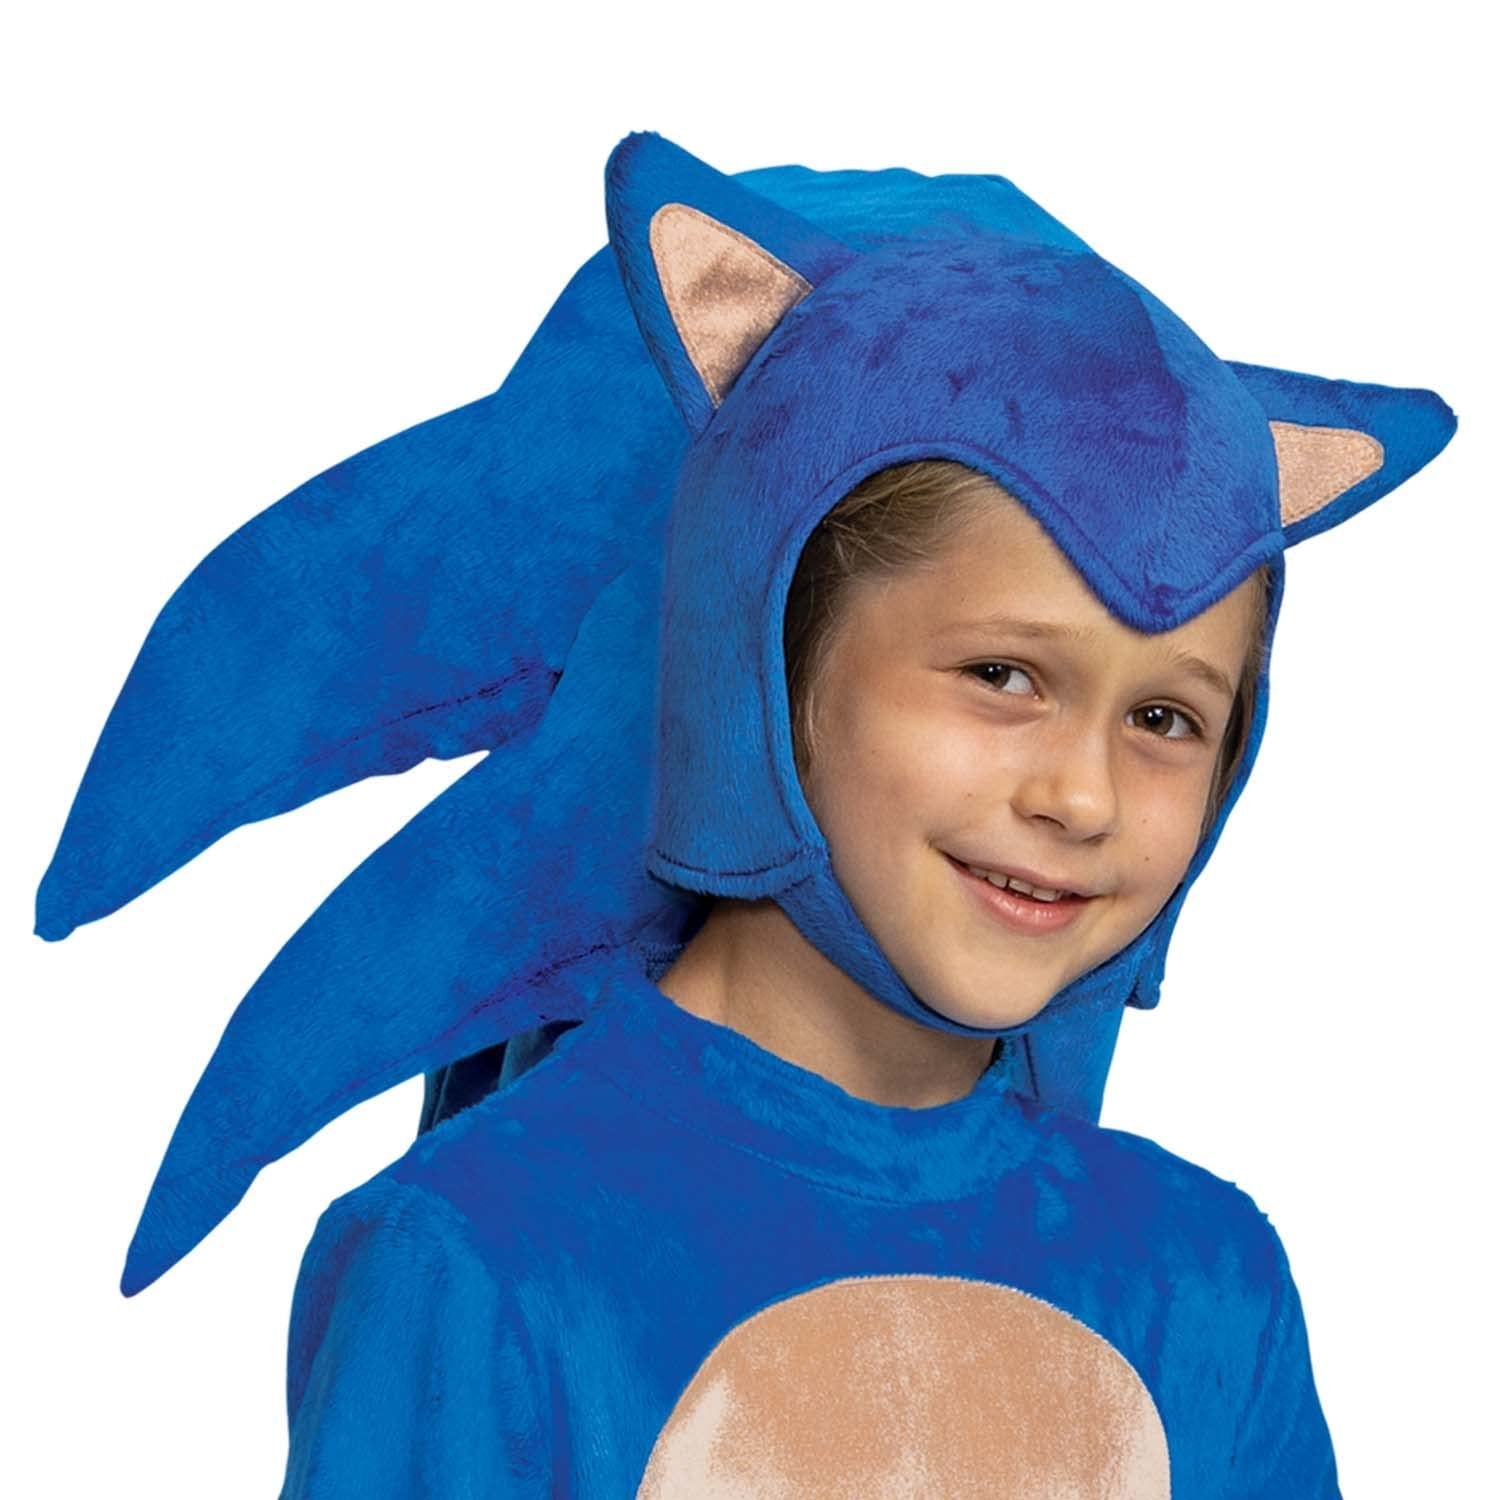 Sonic the Hedgehog Costume, Official Deluxe Sonic Movie Costume and Headpiece, Kids Size Large (10-12)